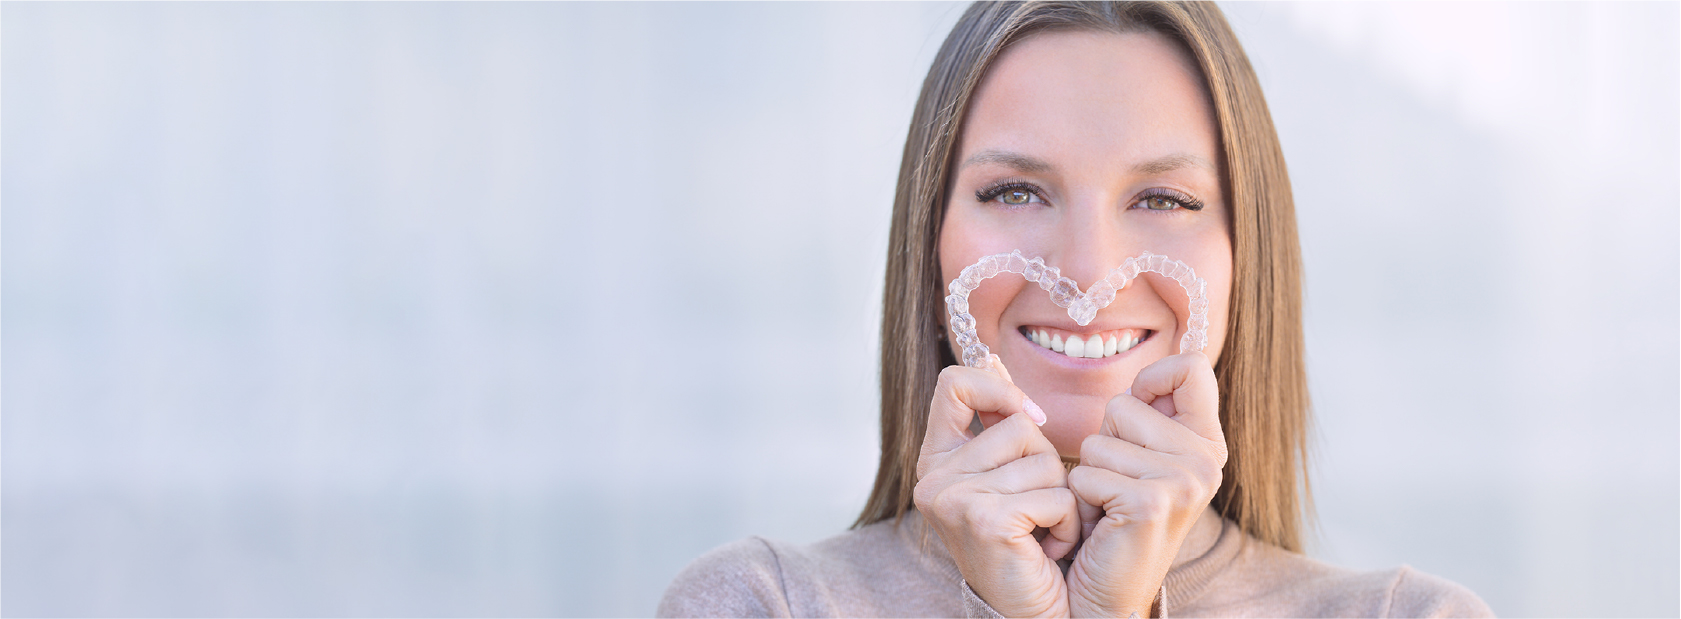 Clear Aligner Tips Header - Woman Smiling